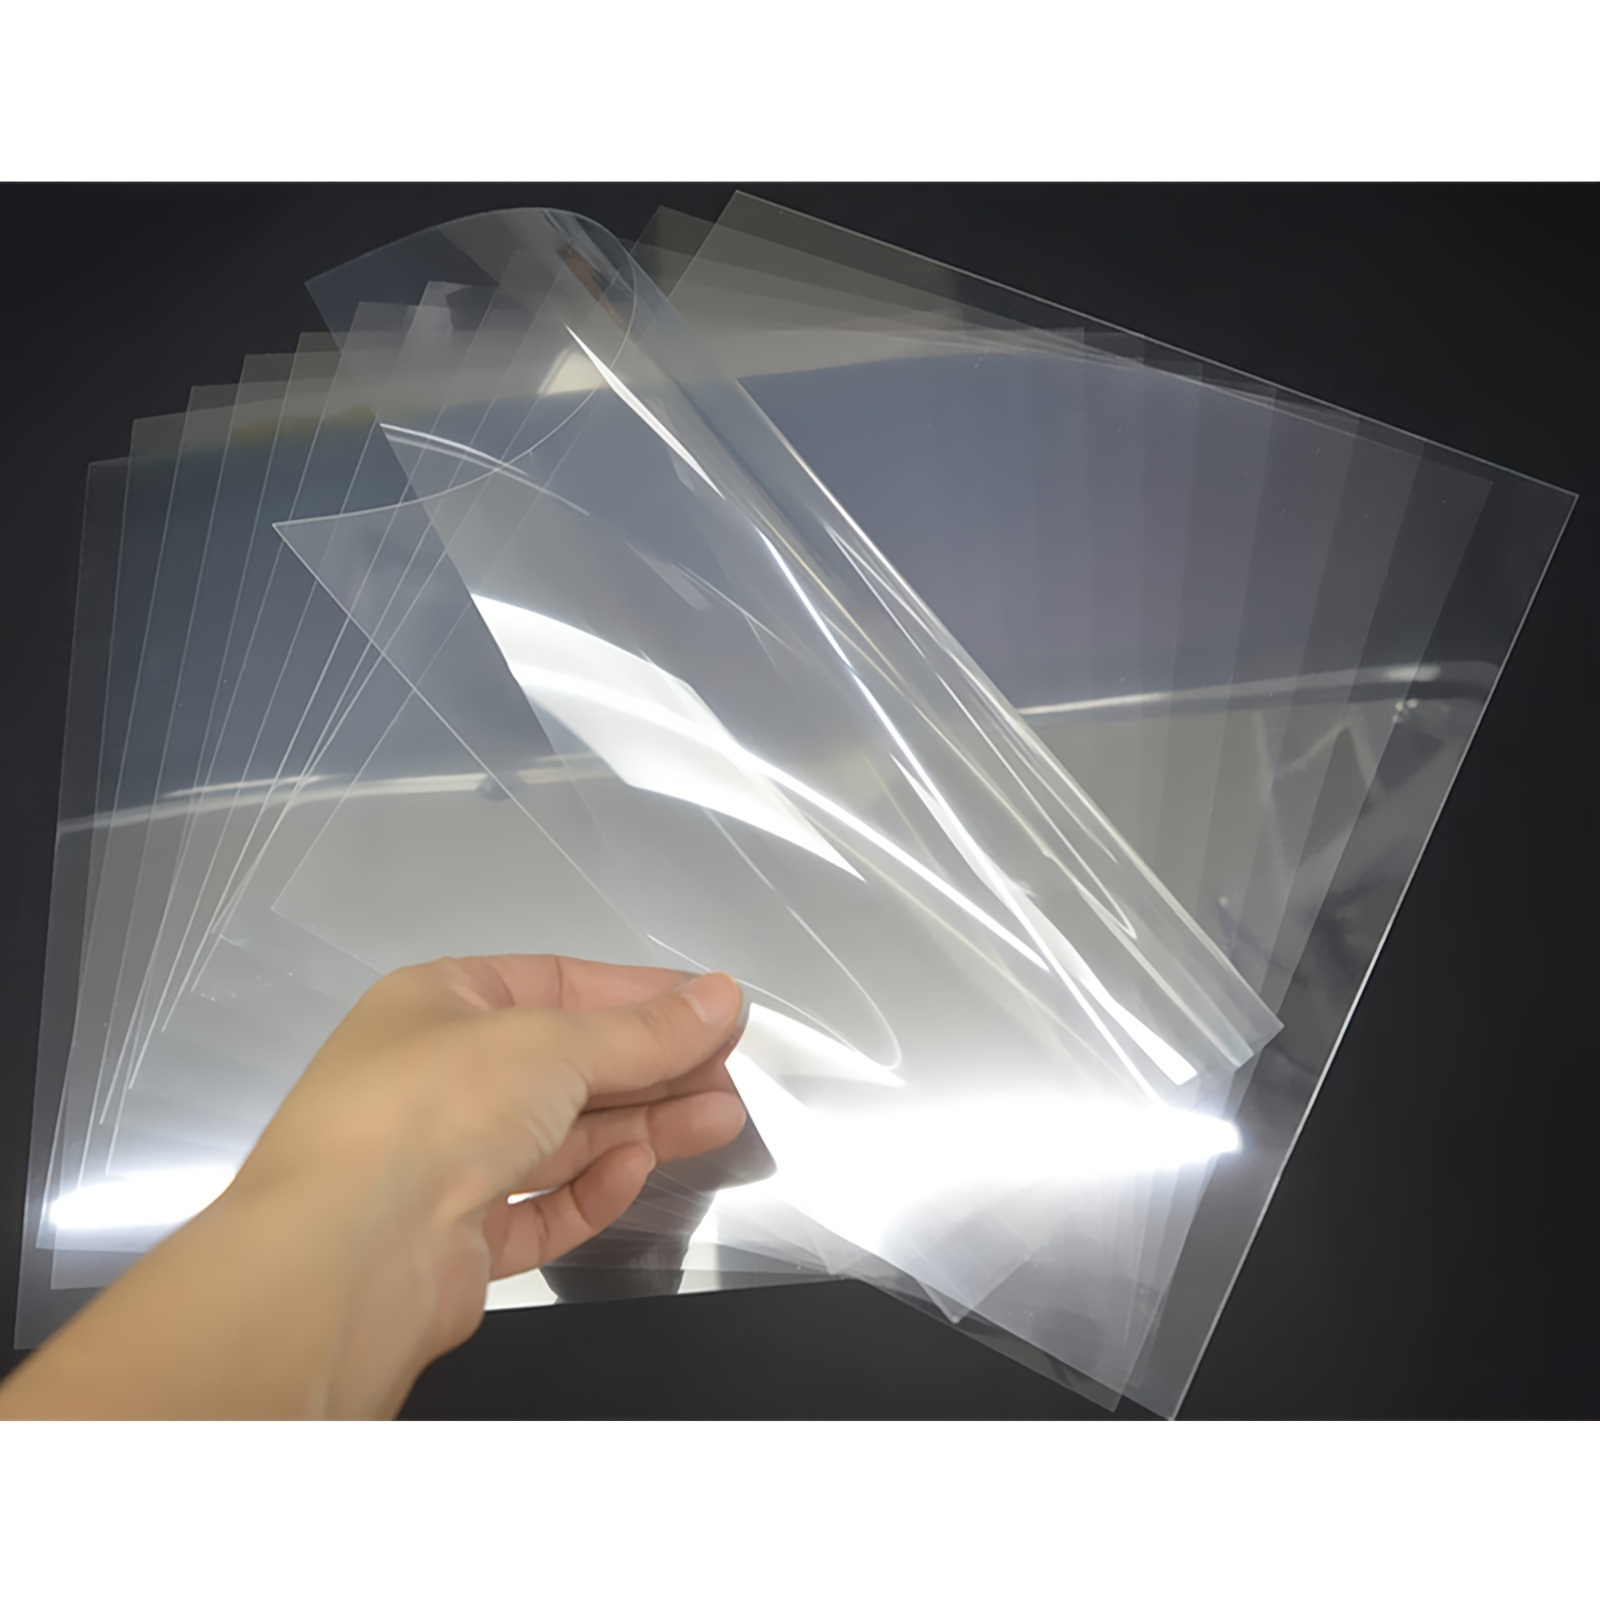 Weliu Transparency Film for Inkjet Printers 30 Sheets Transparency Paper  Sheets for Overhead Projector 100% Clear 8.5 x 11 Inches